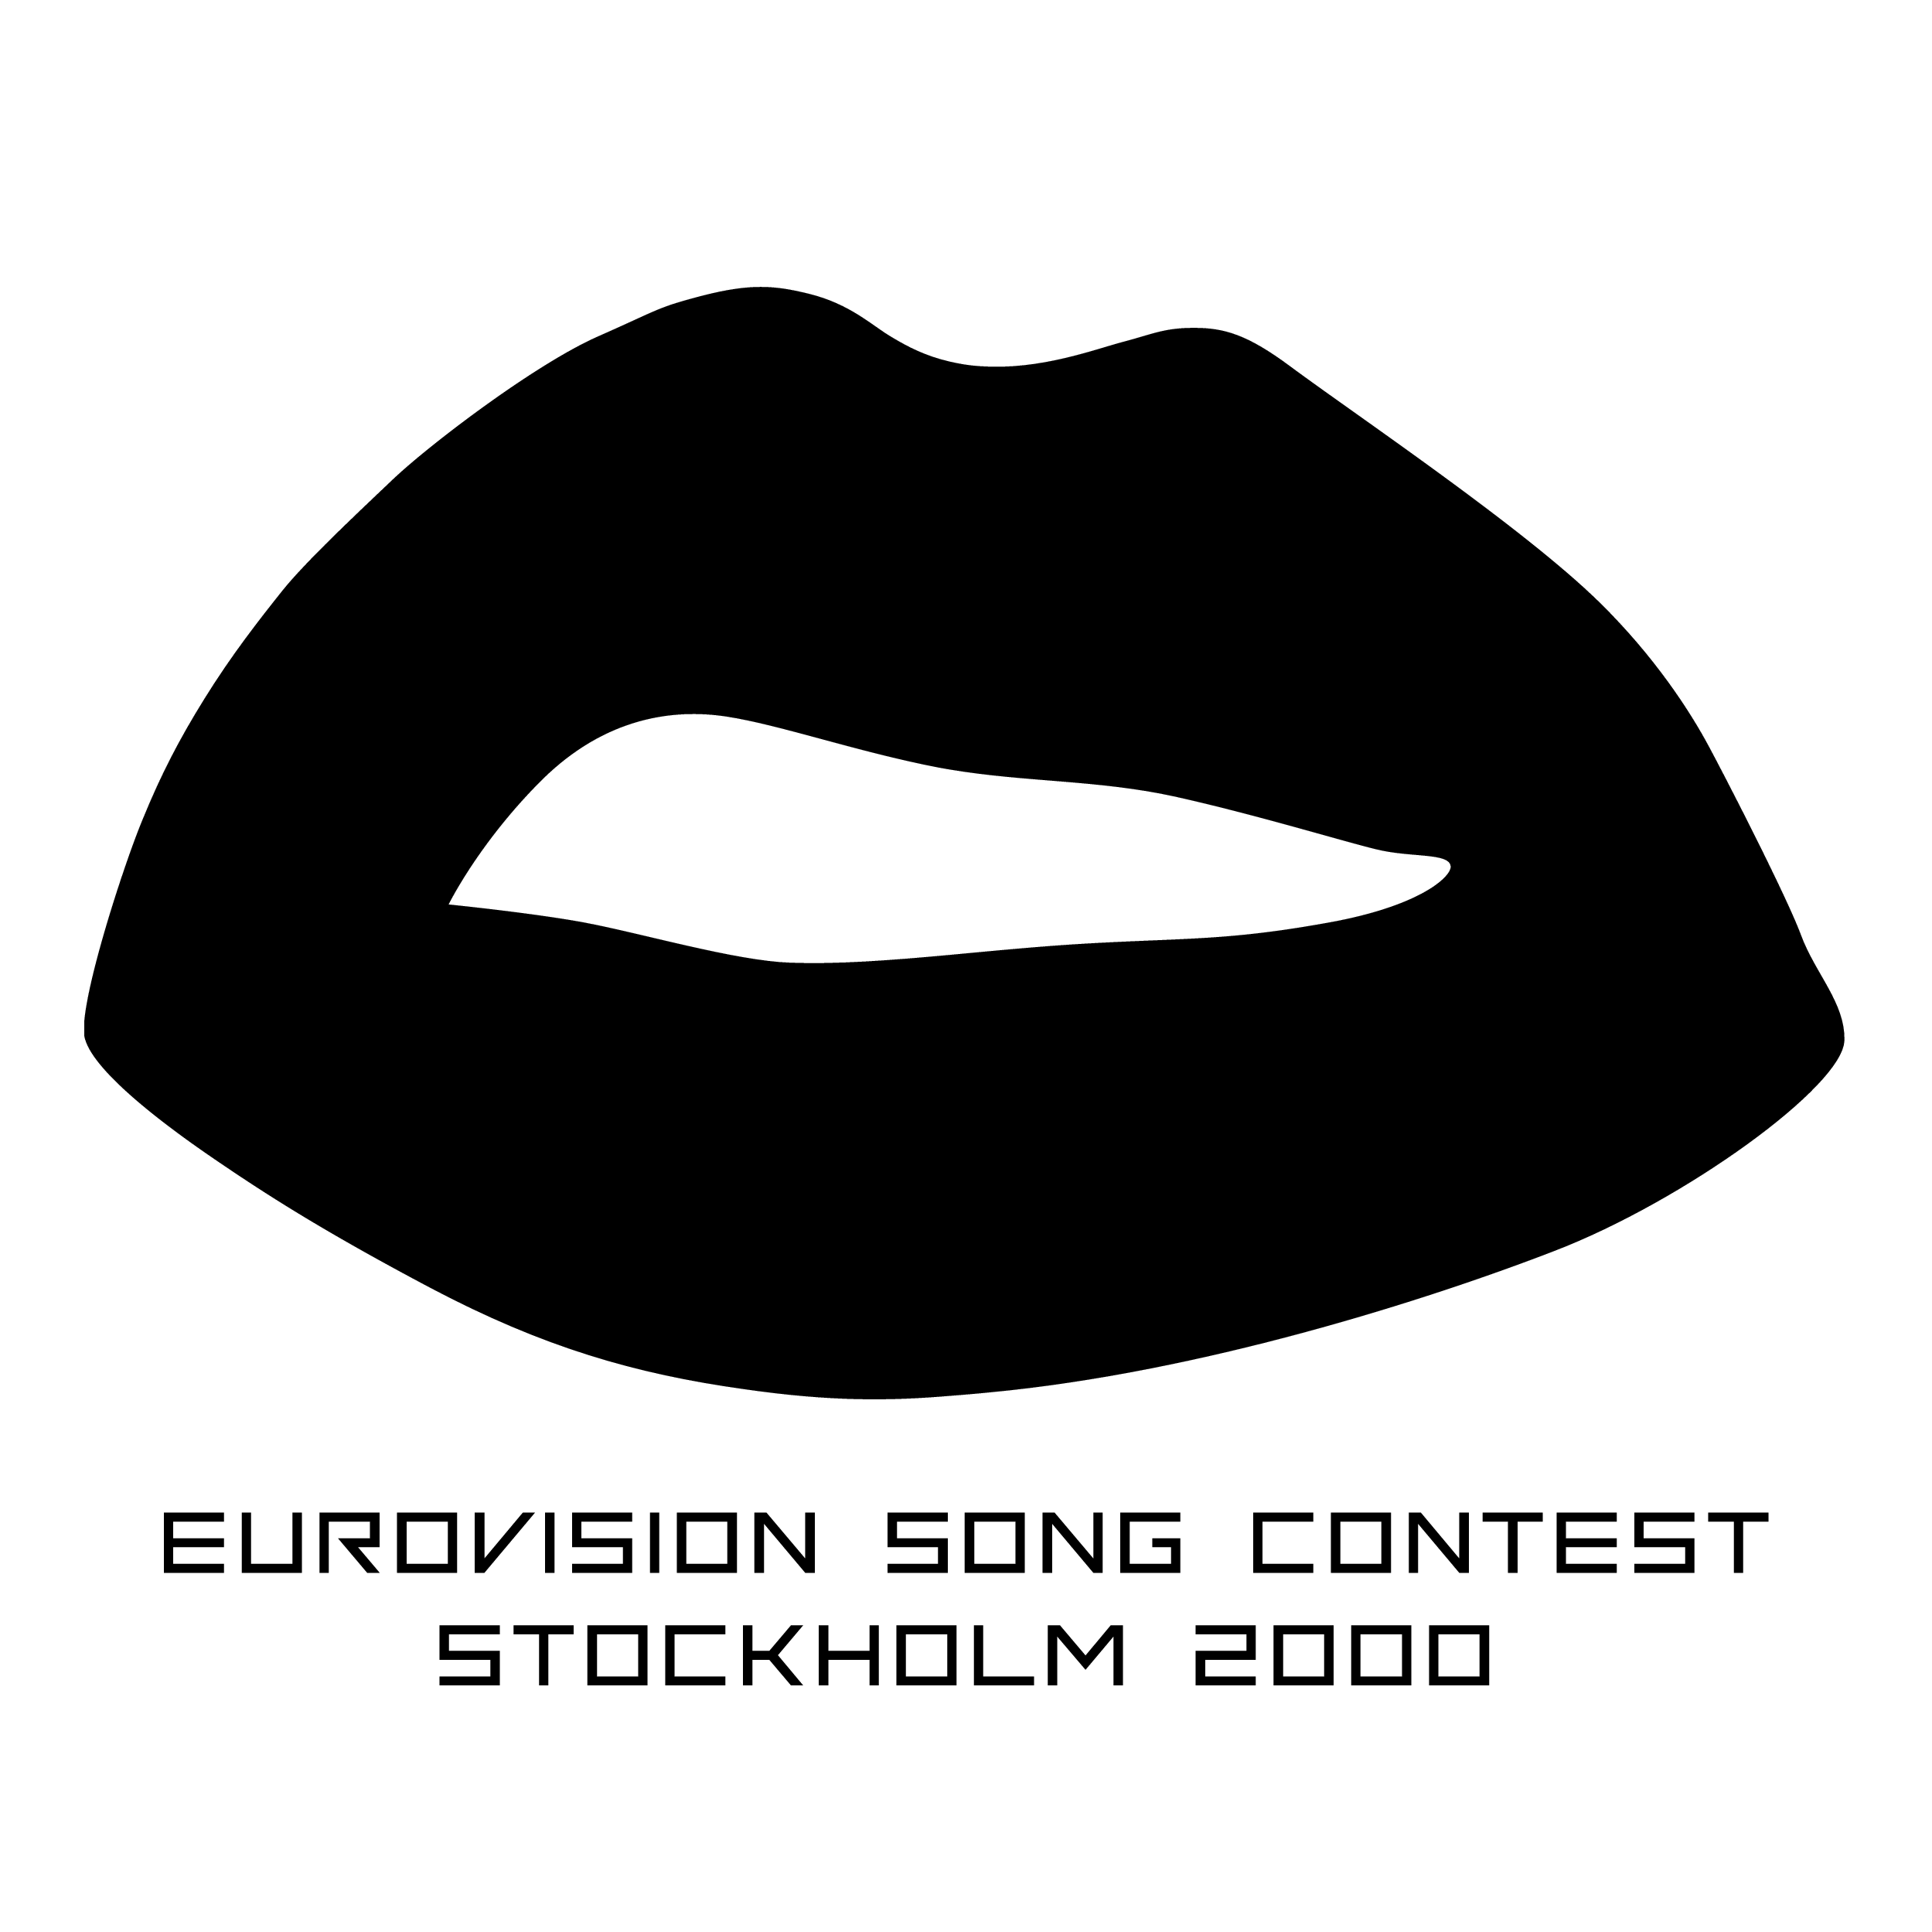 Eurovision Song Contest 2000